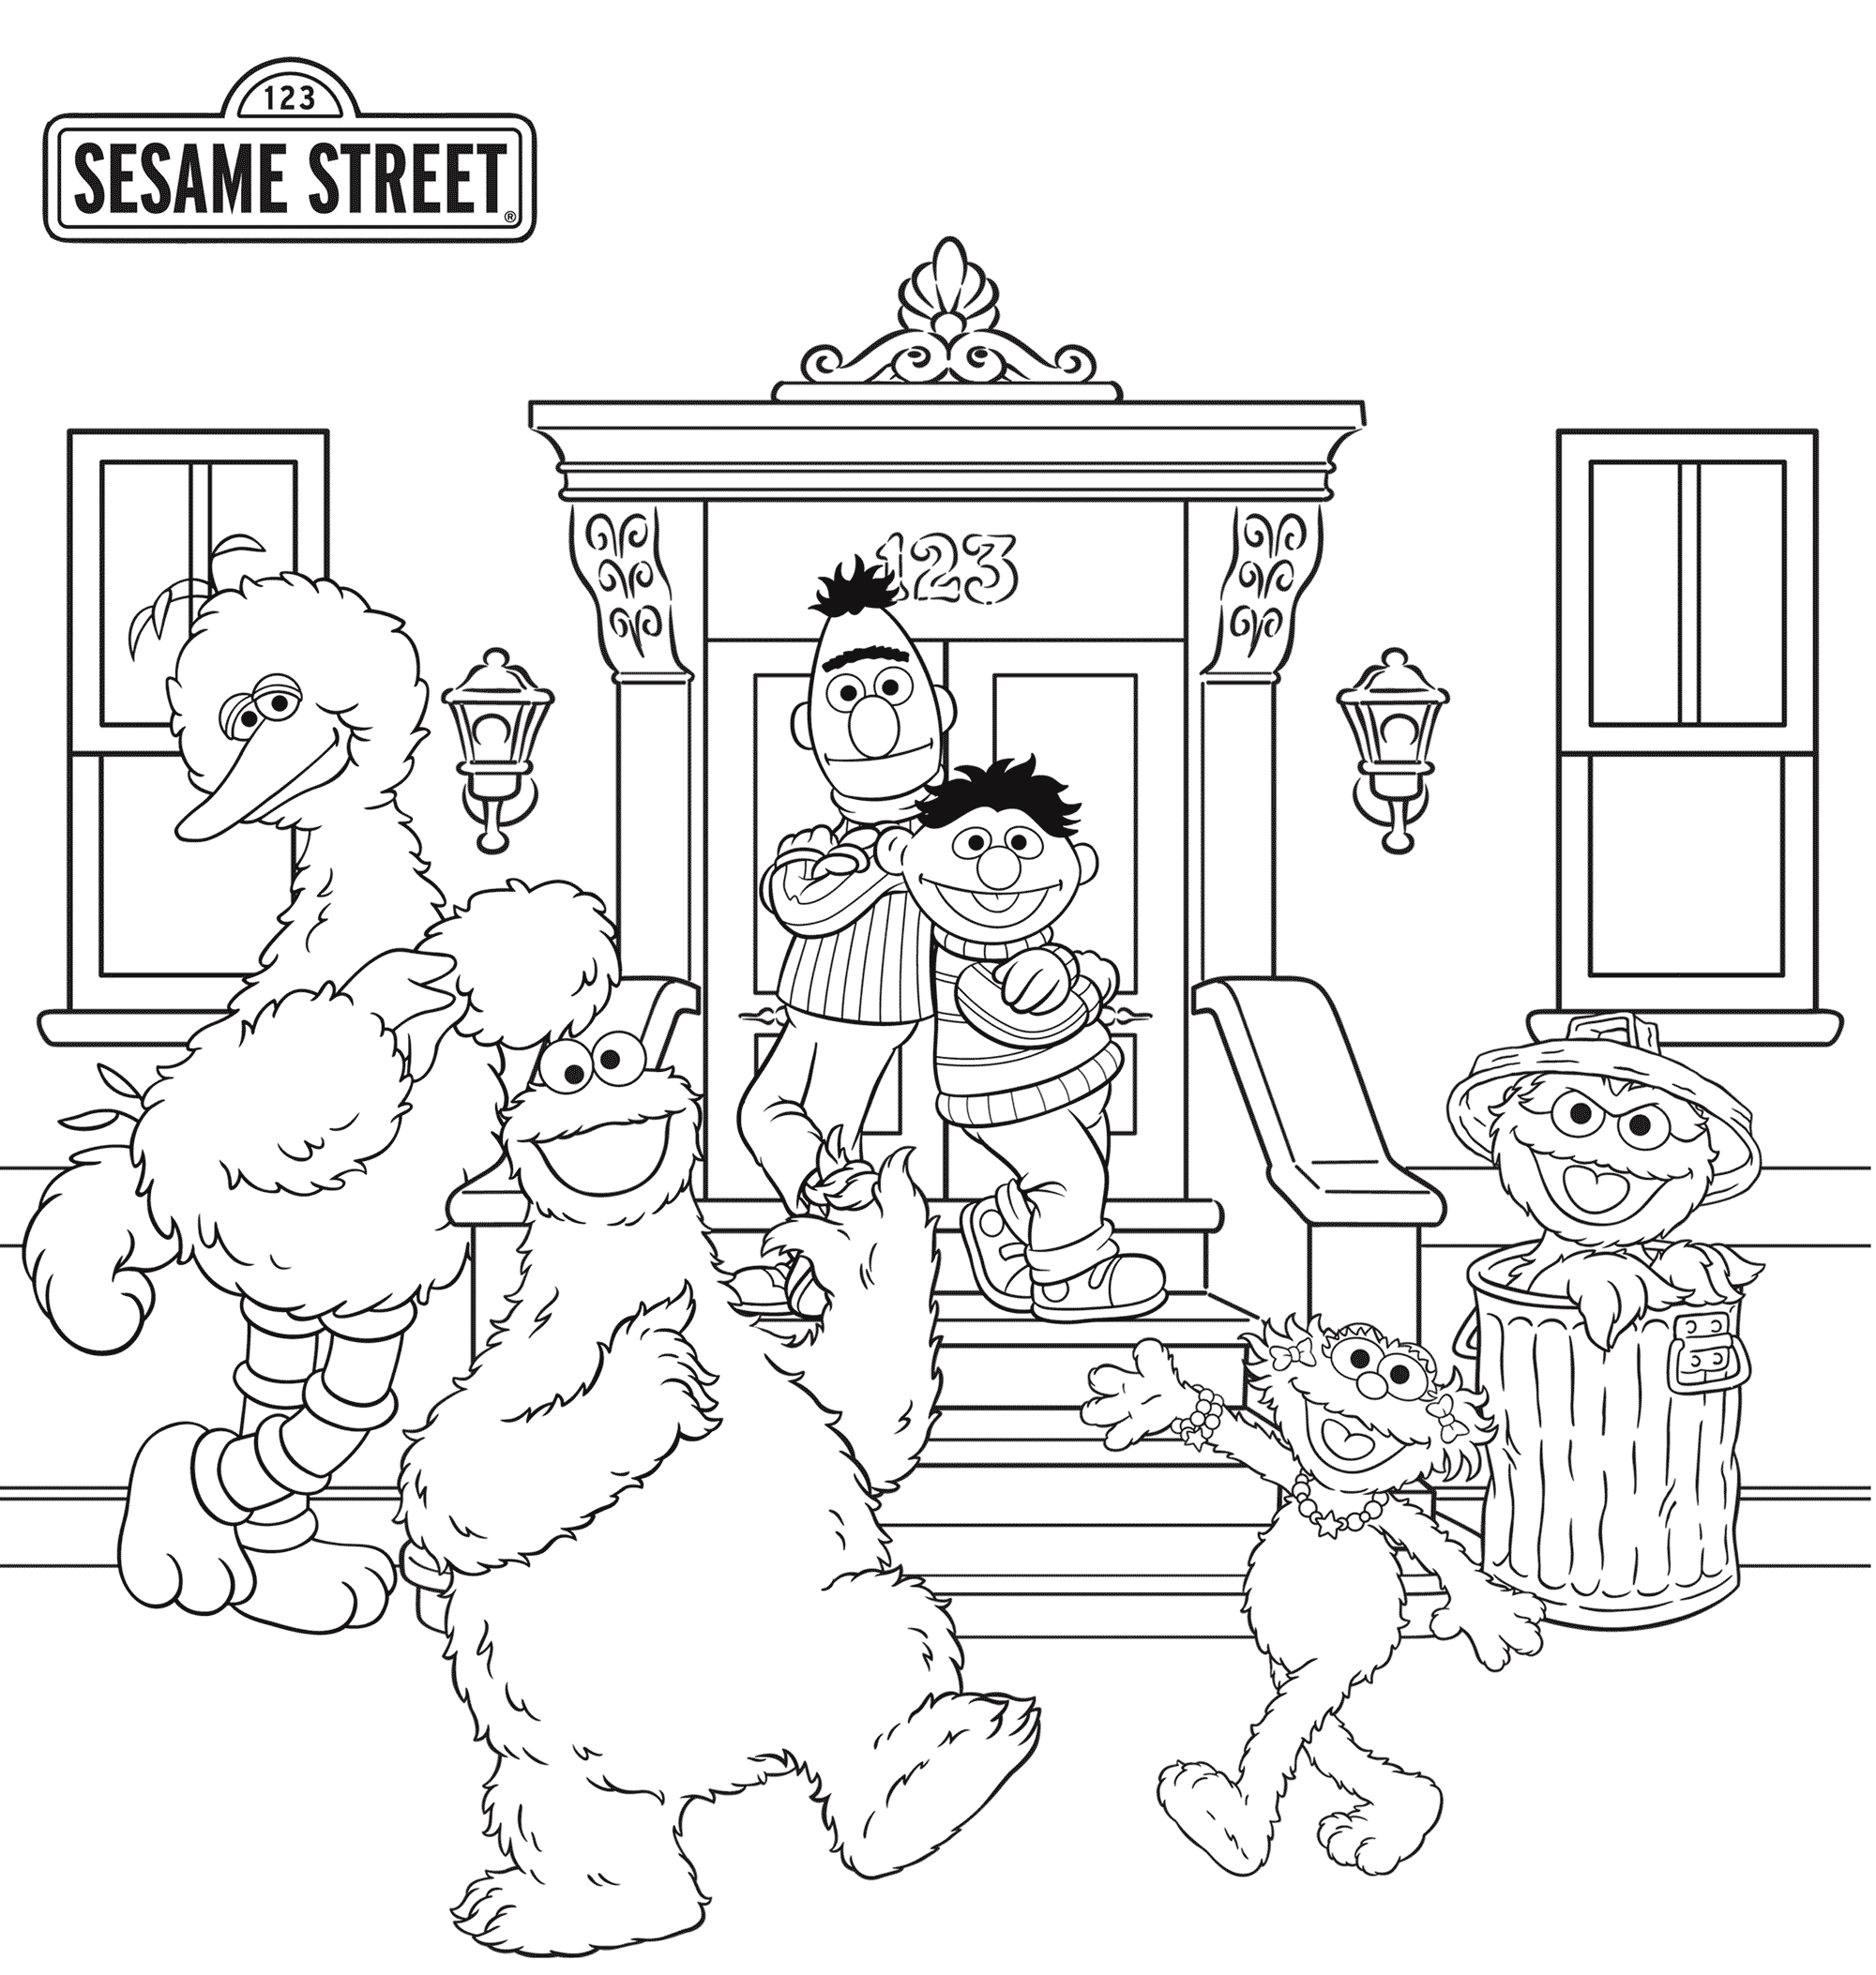 baby sesame street coloring pages to print | MP Head